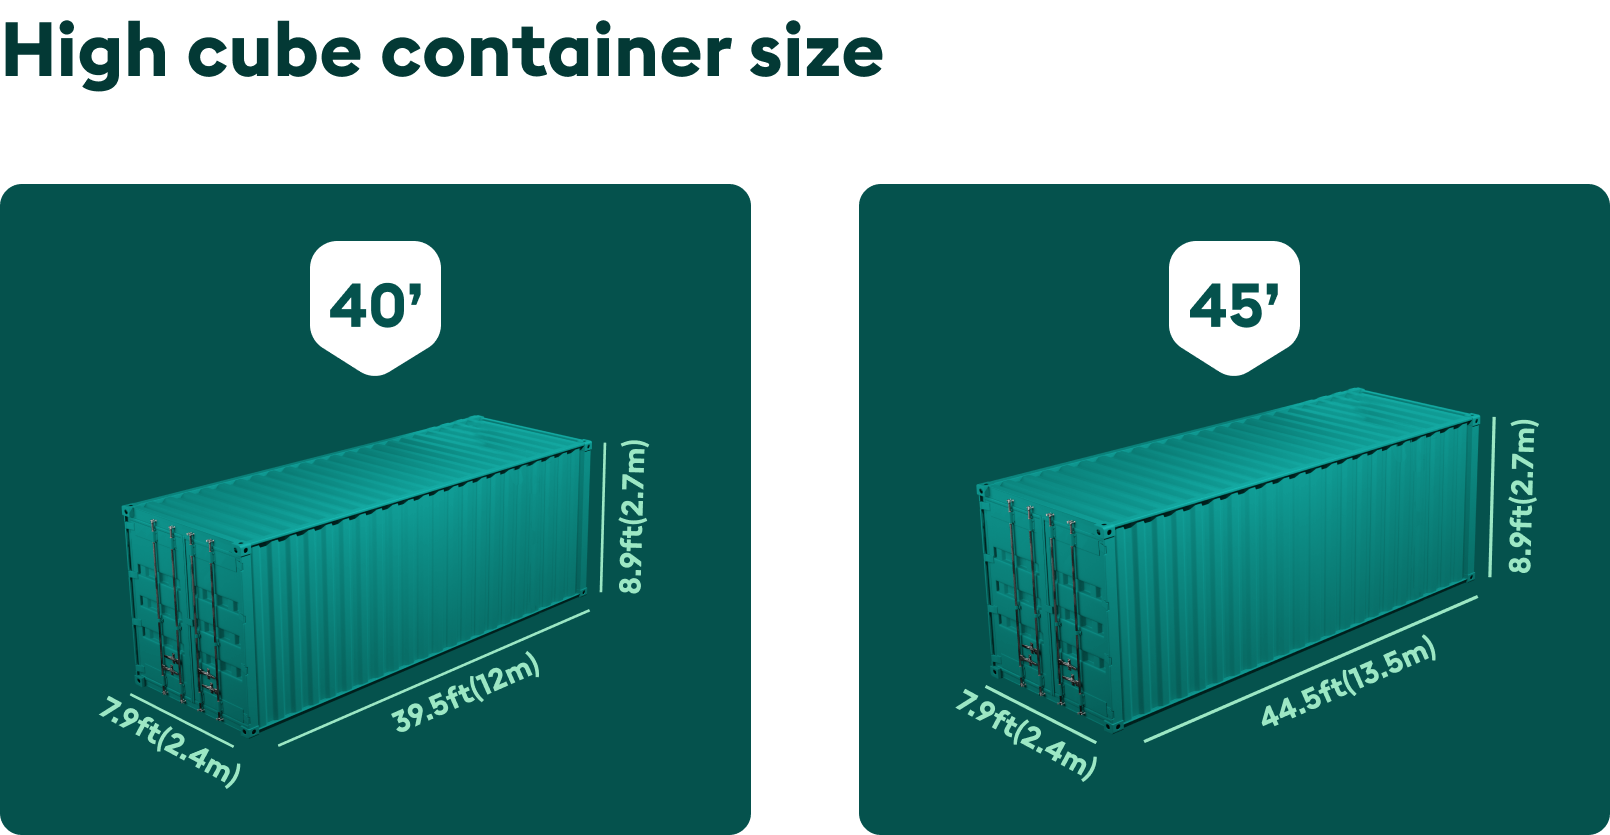 40ft and 45ft high cube containers